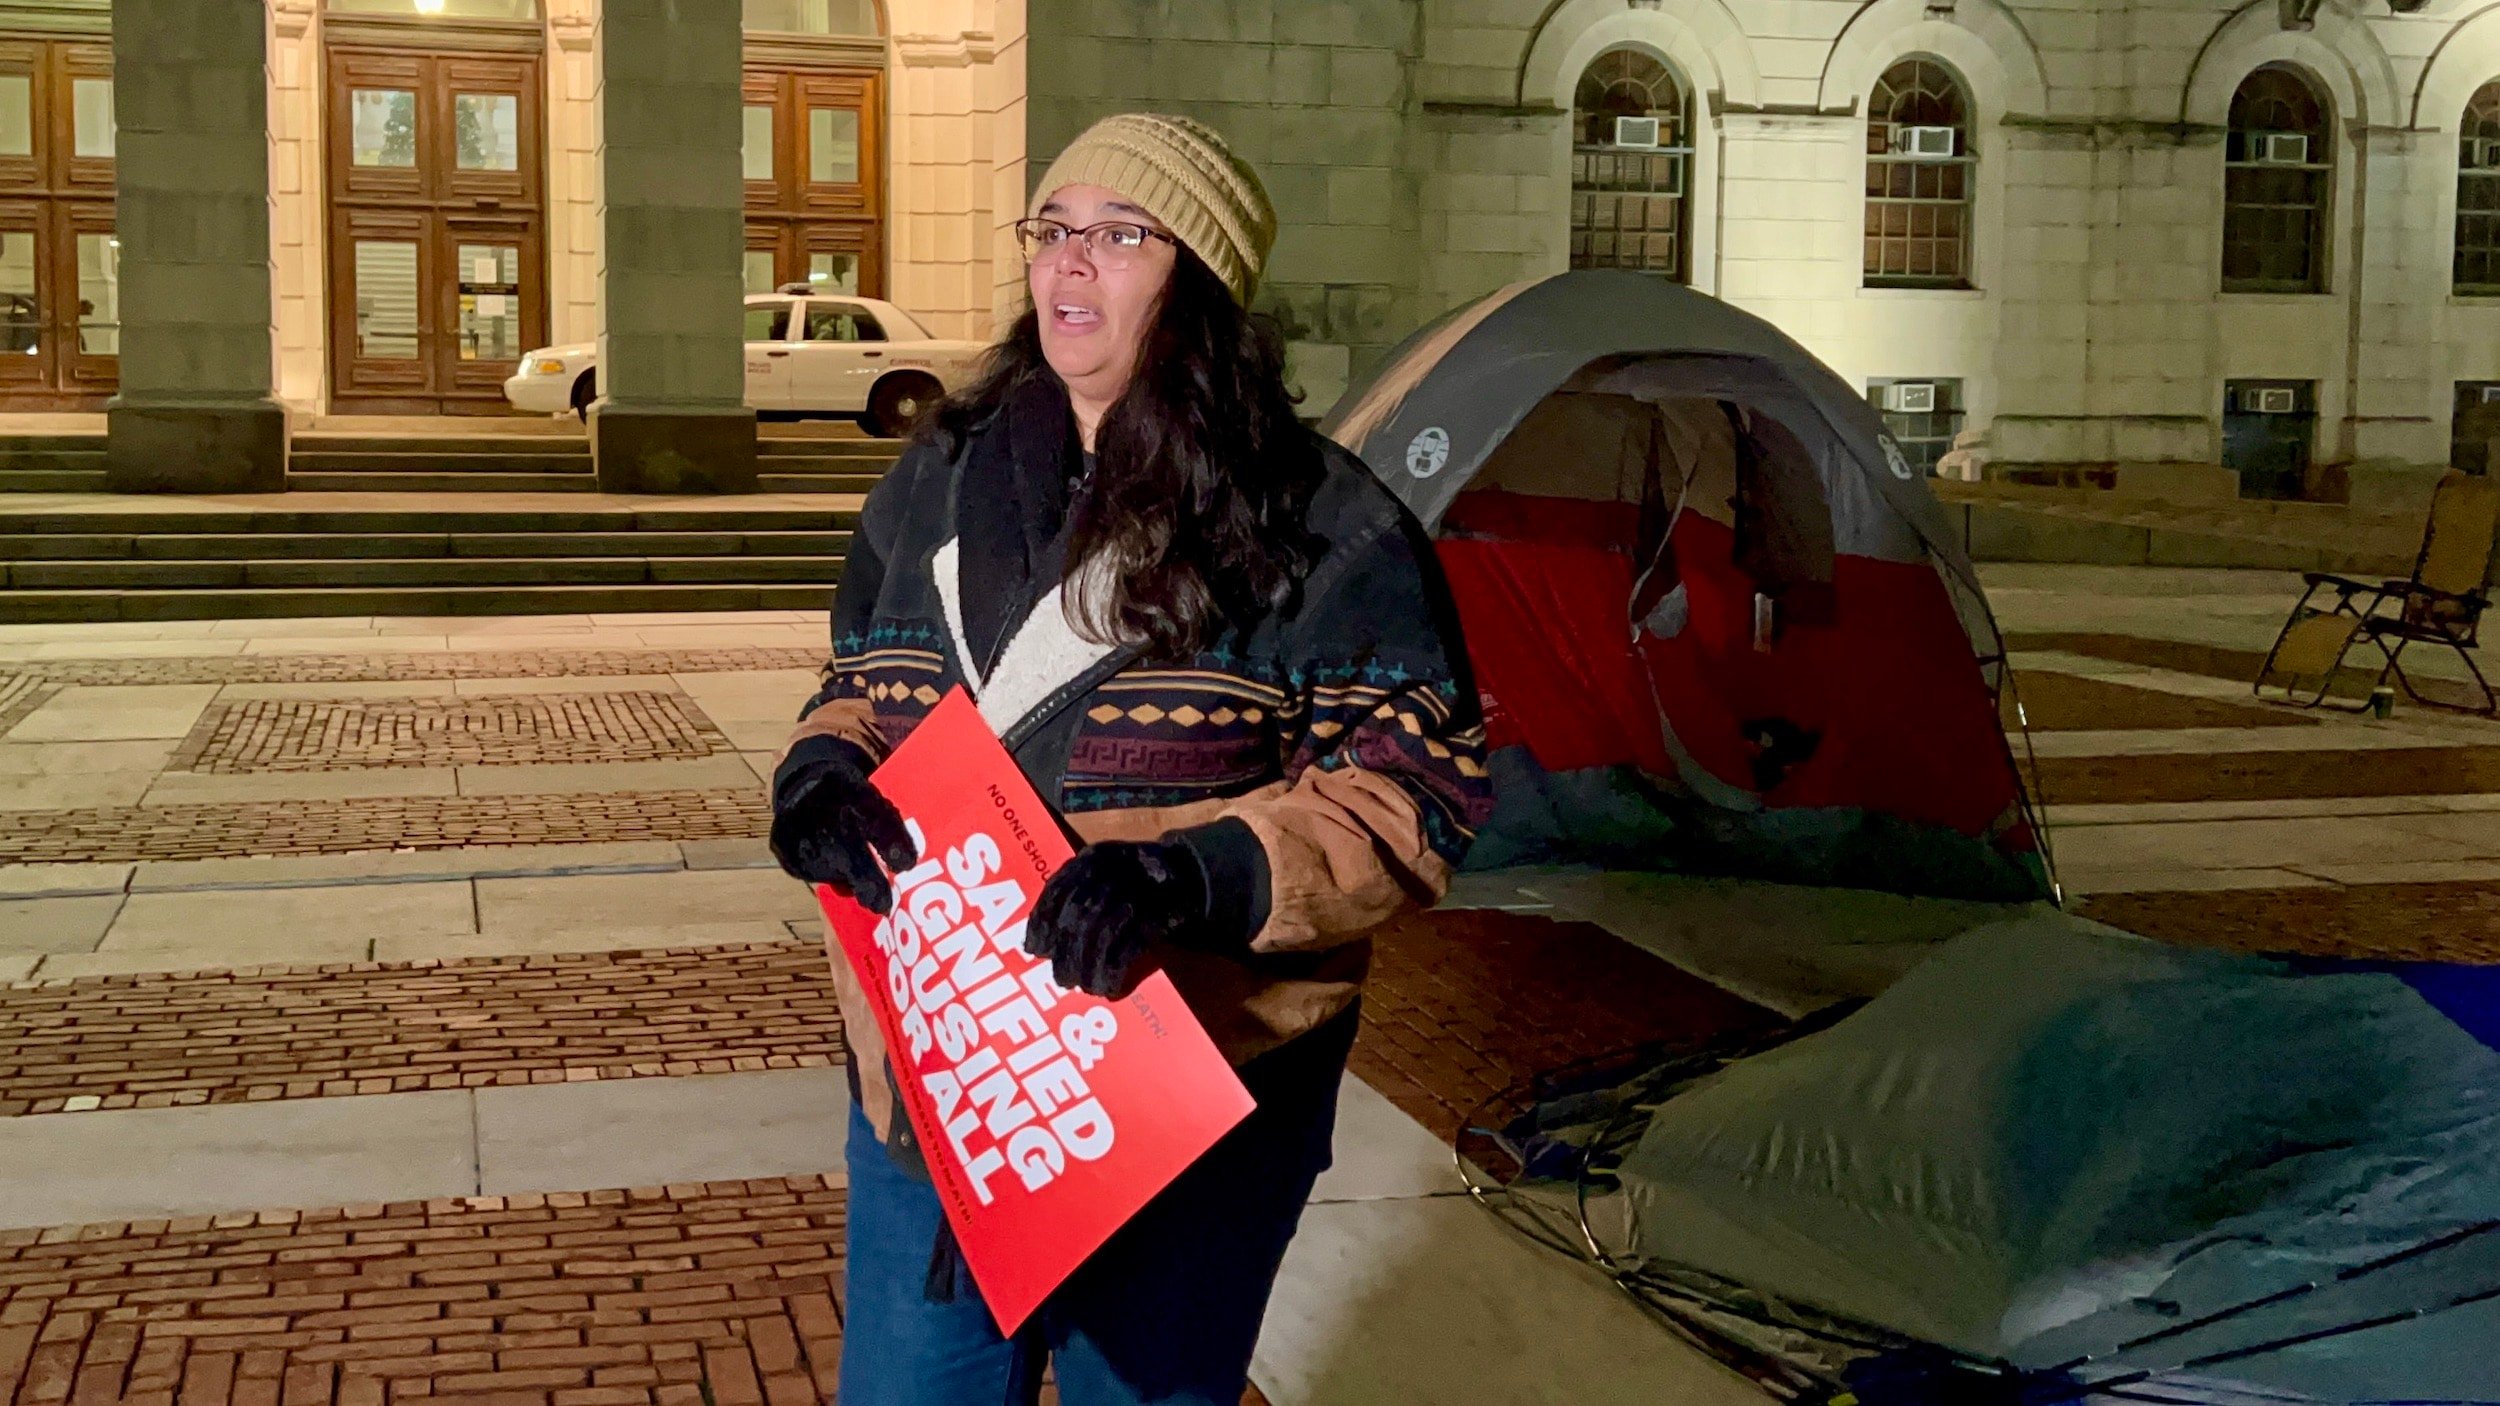 Photo for Senator Mendes to sleep in a tent outside State House until leadership acts on homelessness crisis